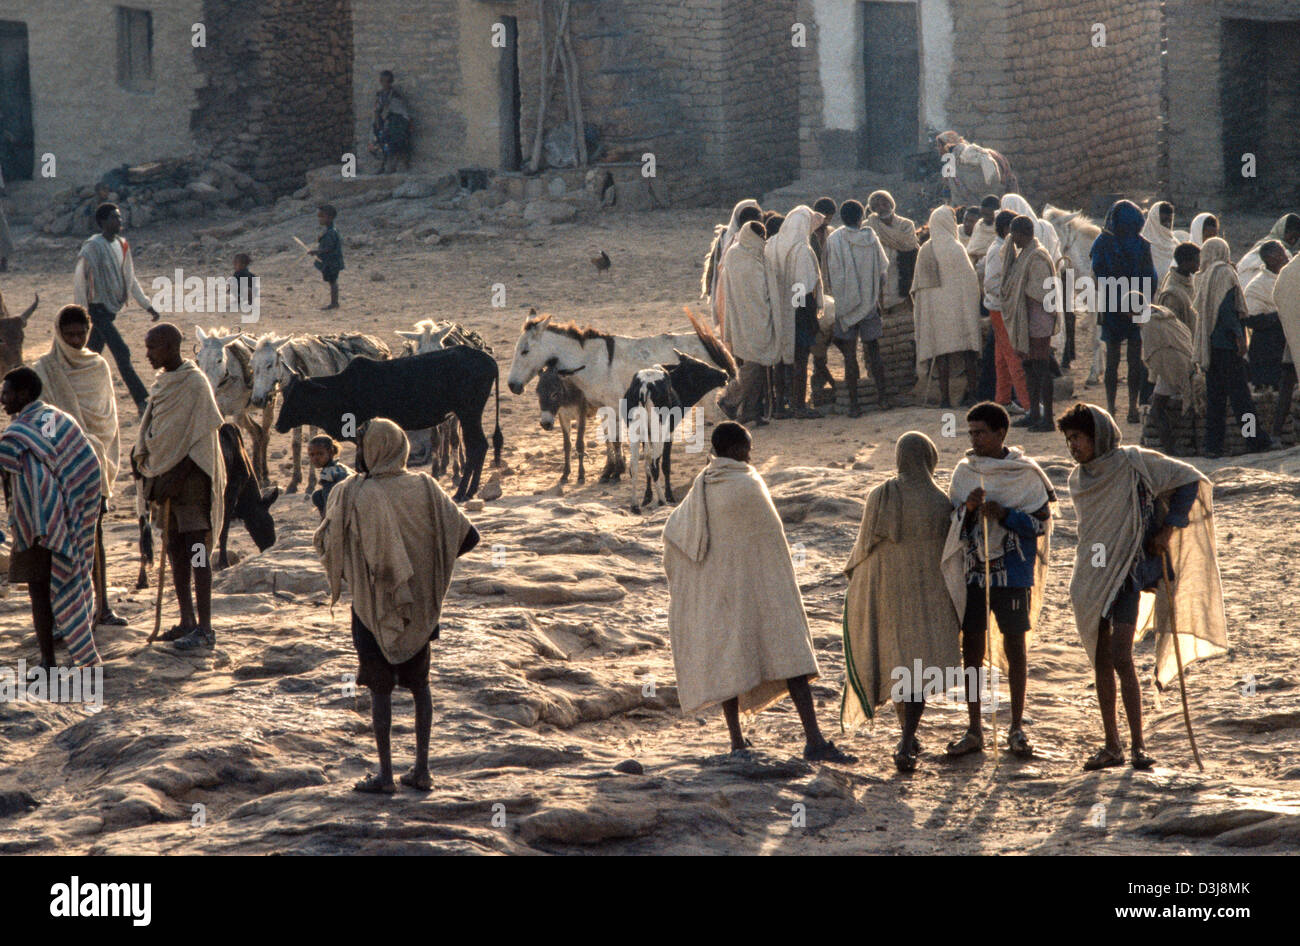 Early morning view of farmers and their livestock at an outdoor market, Mekoni, Tigray, Ethiopia Stock Photo